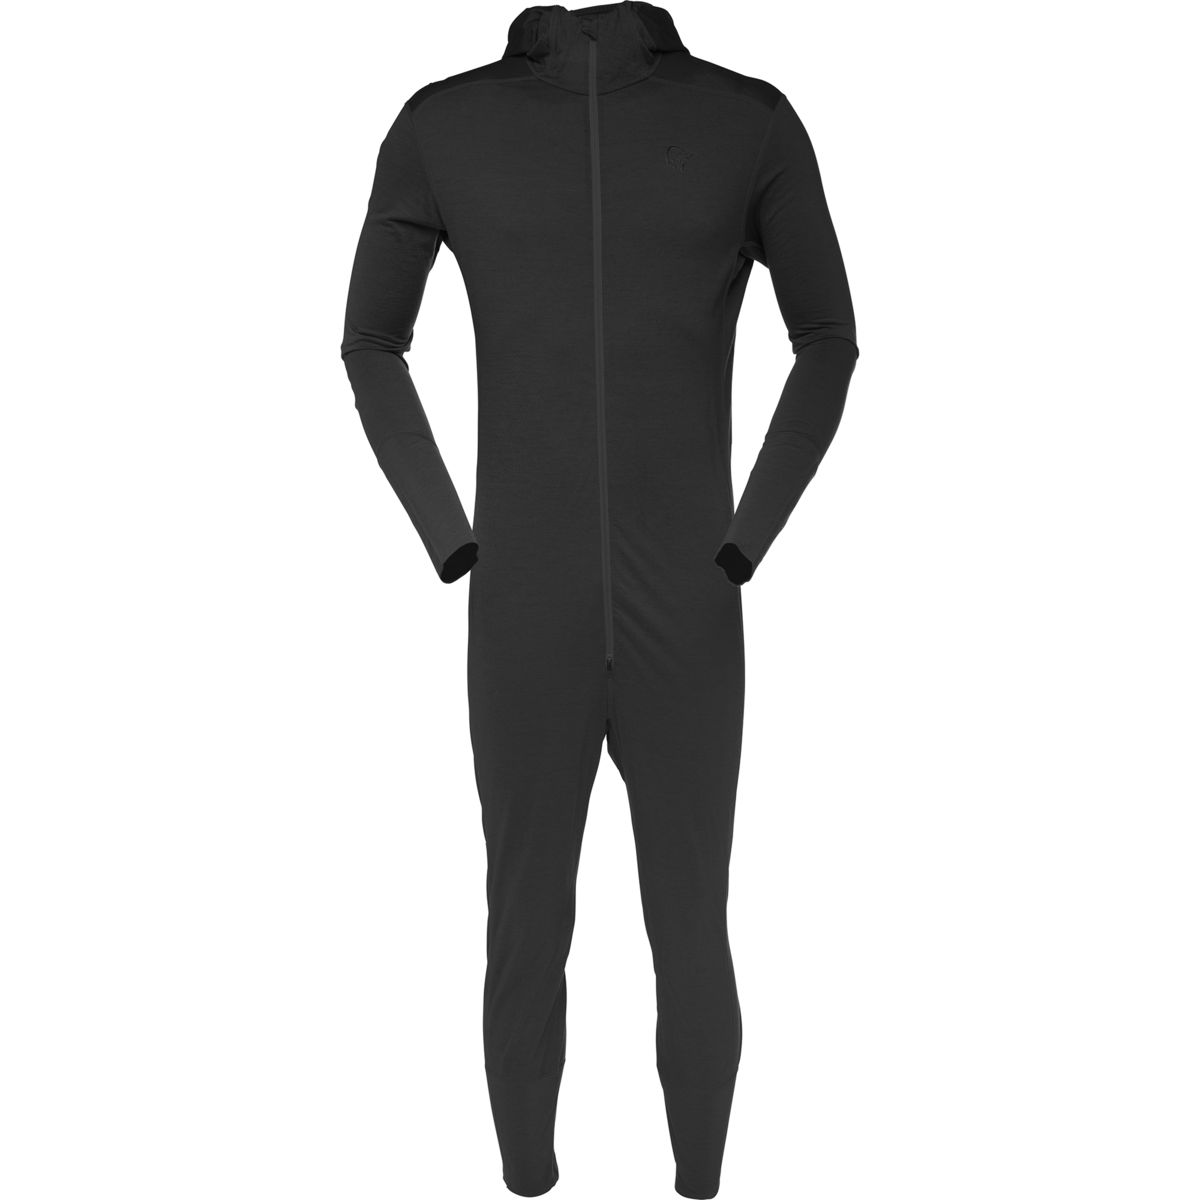 Wholesale Adult One Piece Long Johns For Intimate Warmth And